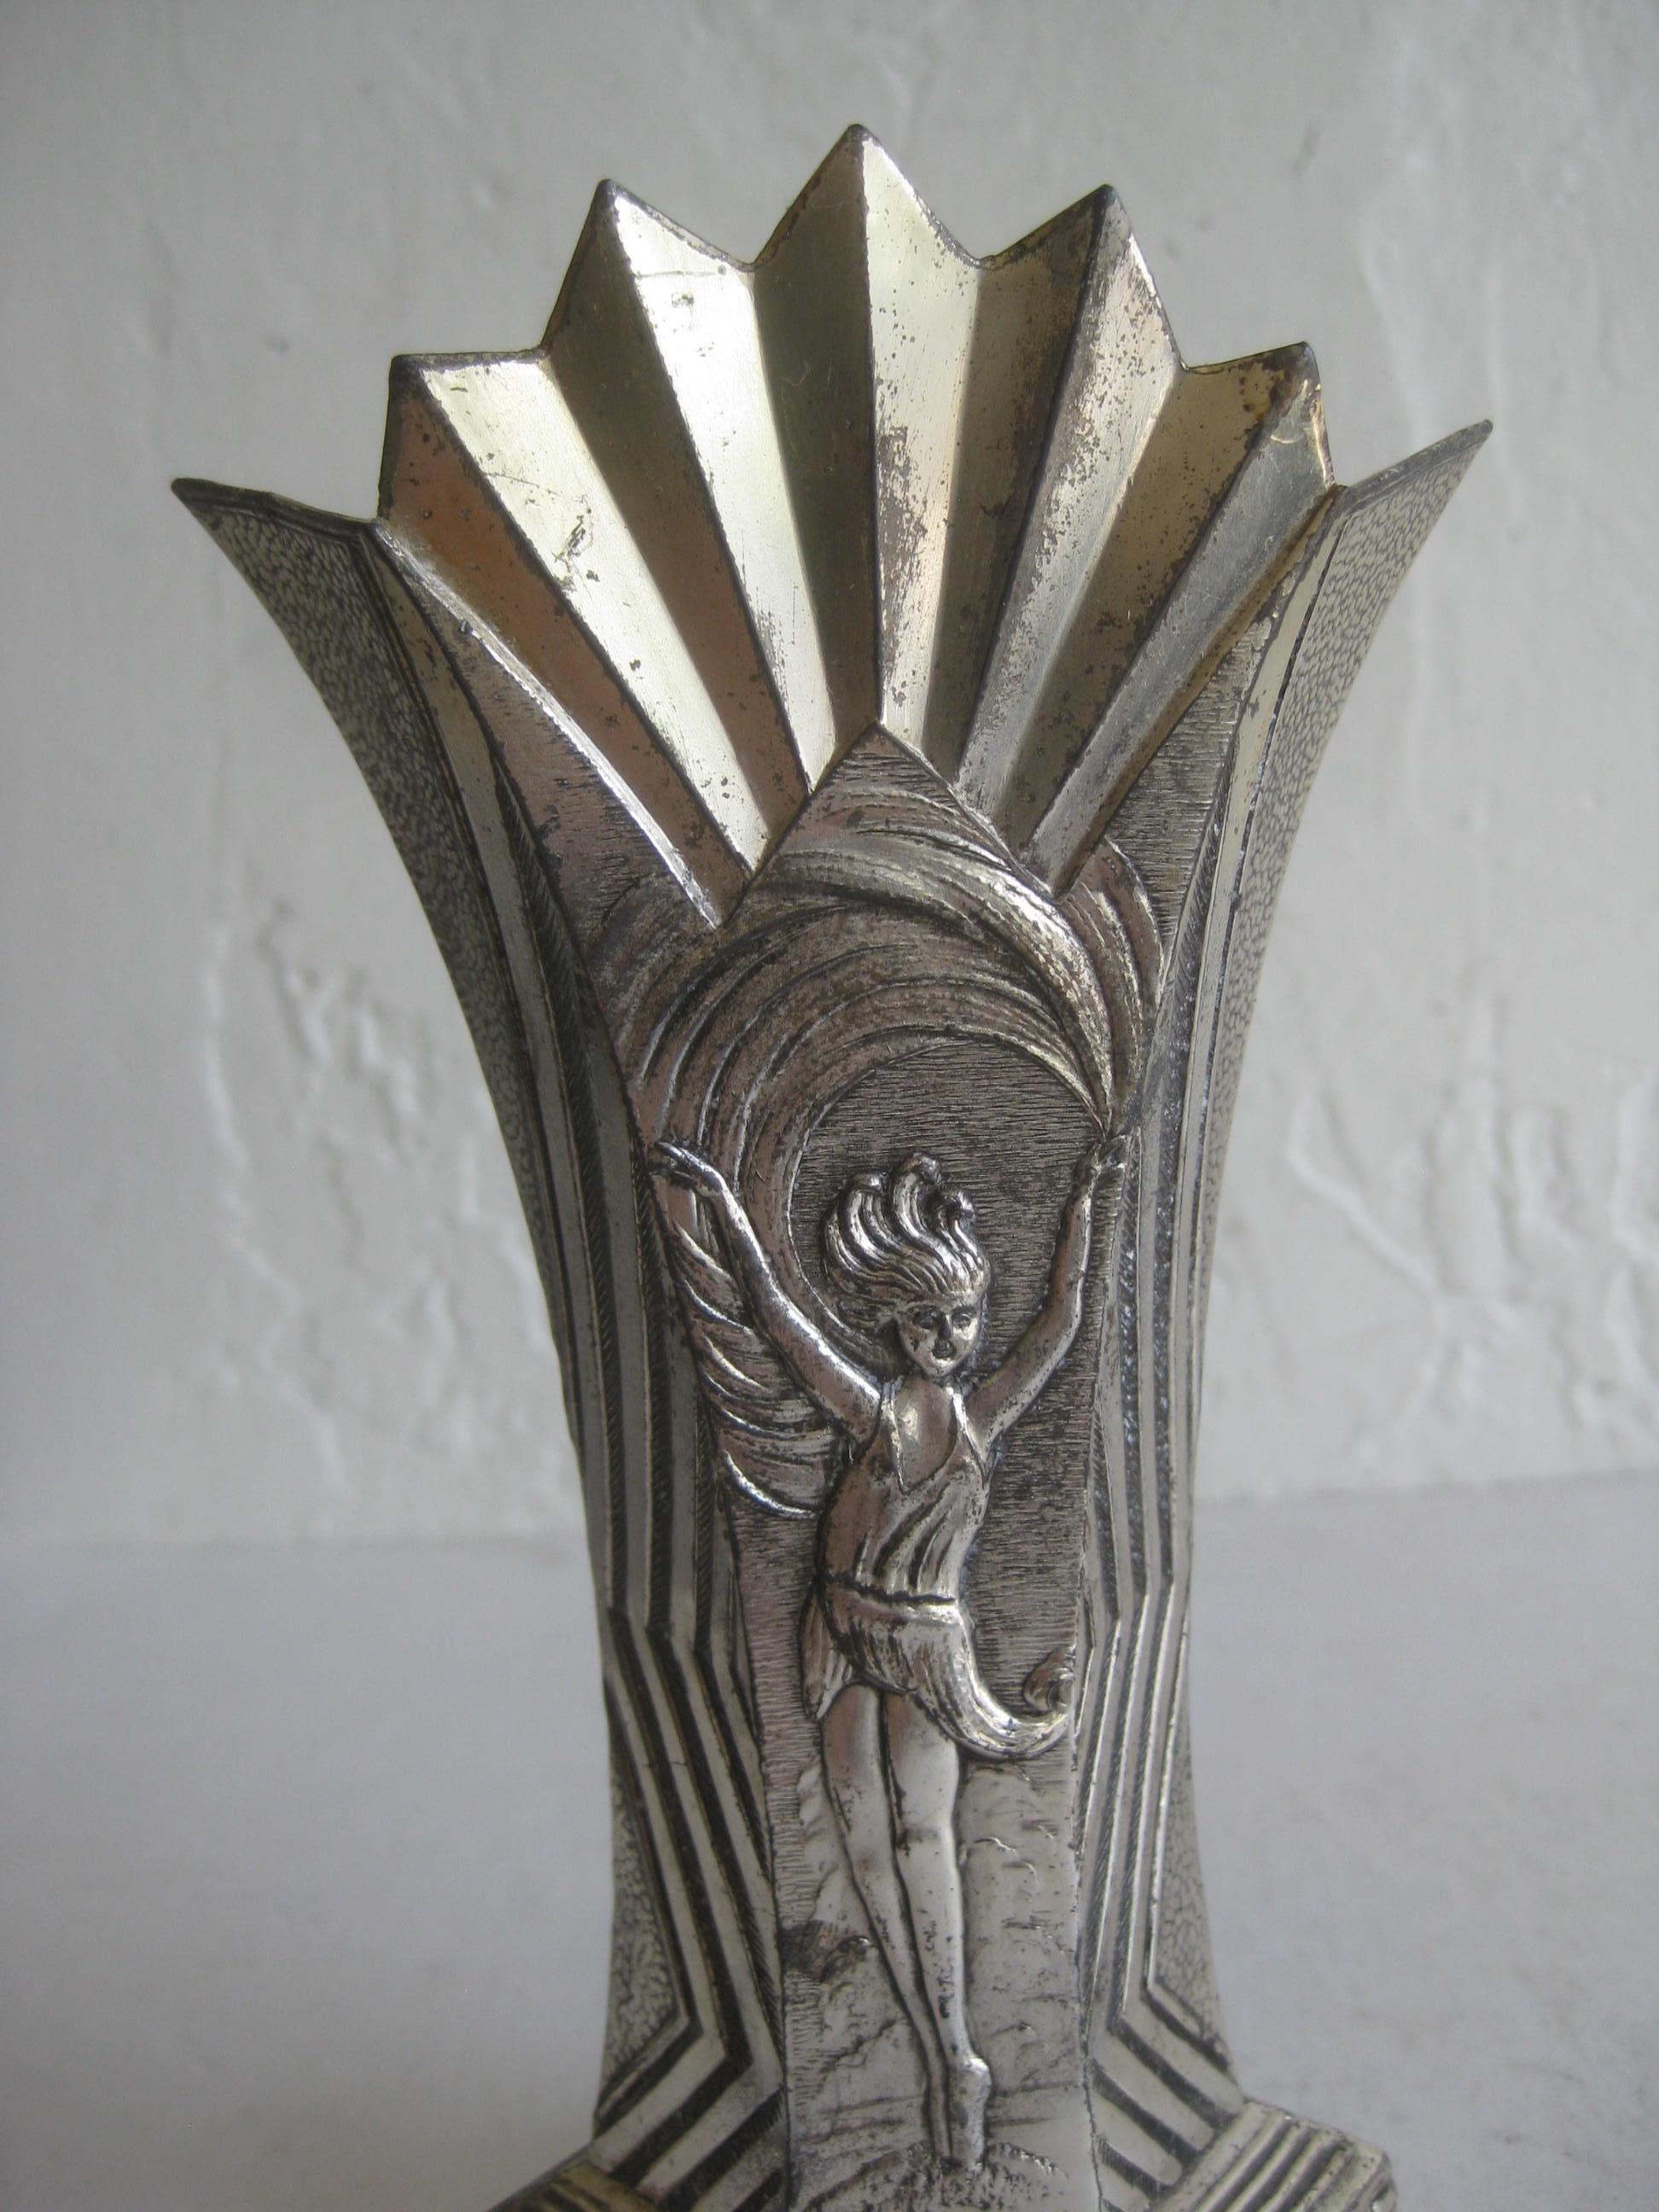 Great antique Art Deco fan shaped figural white metal vase. Great design and detail. Greek key design on the bottom edge. Made in Japan and is marked on the bottom. In very nice original condition with patina expected from age. Measures approx. 6